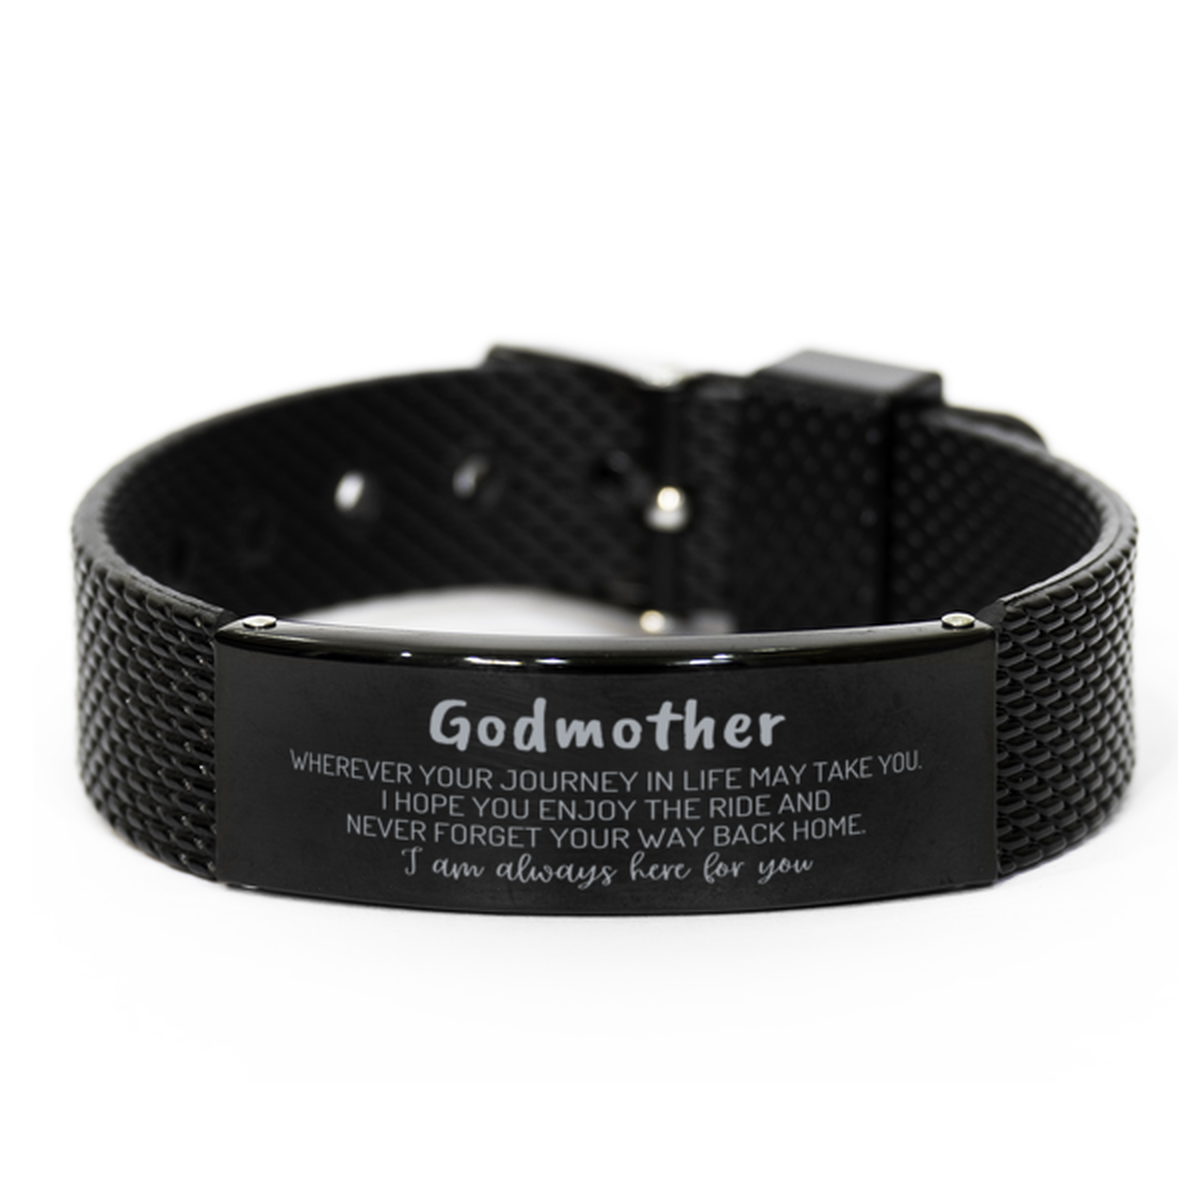 Godmother wherever your journey in life may take you, I am always here for you Godmother Black Shark Mesh Bracelet, Awesome Christmas Gifts For Godmother, Godmother Birthday Gifts for Men Women Family Loved One